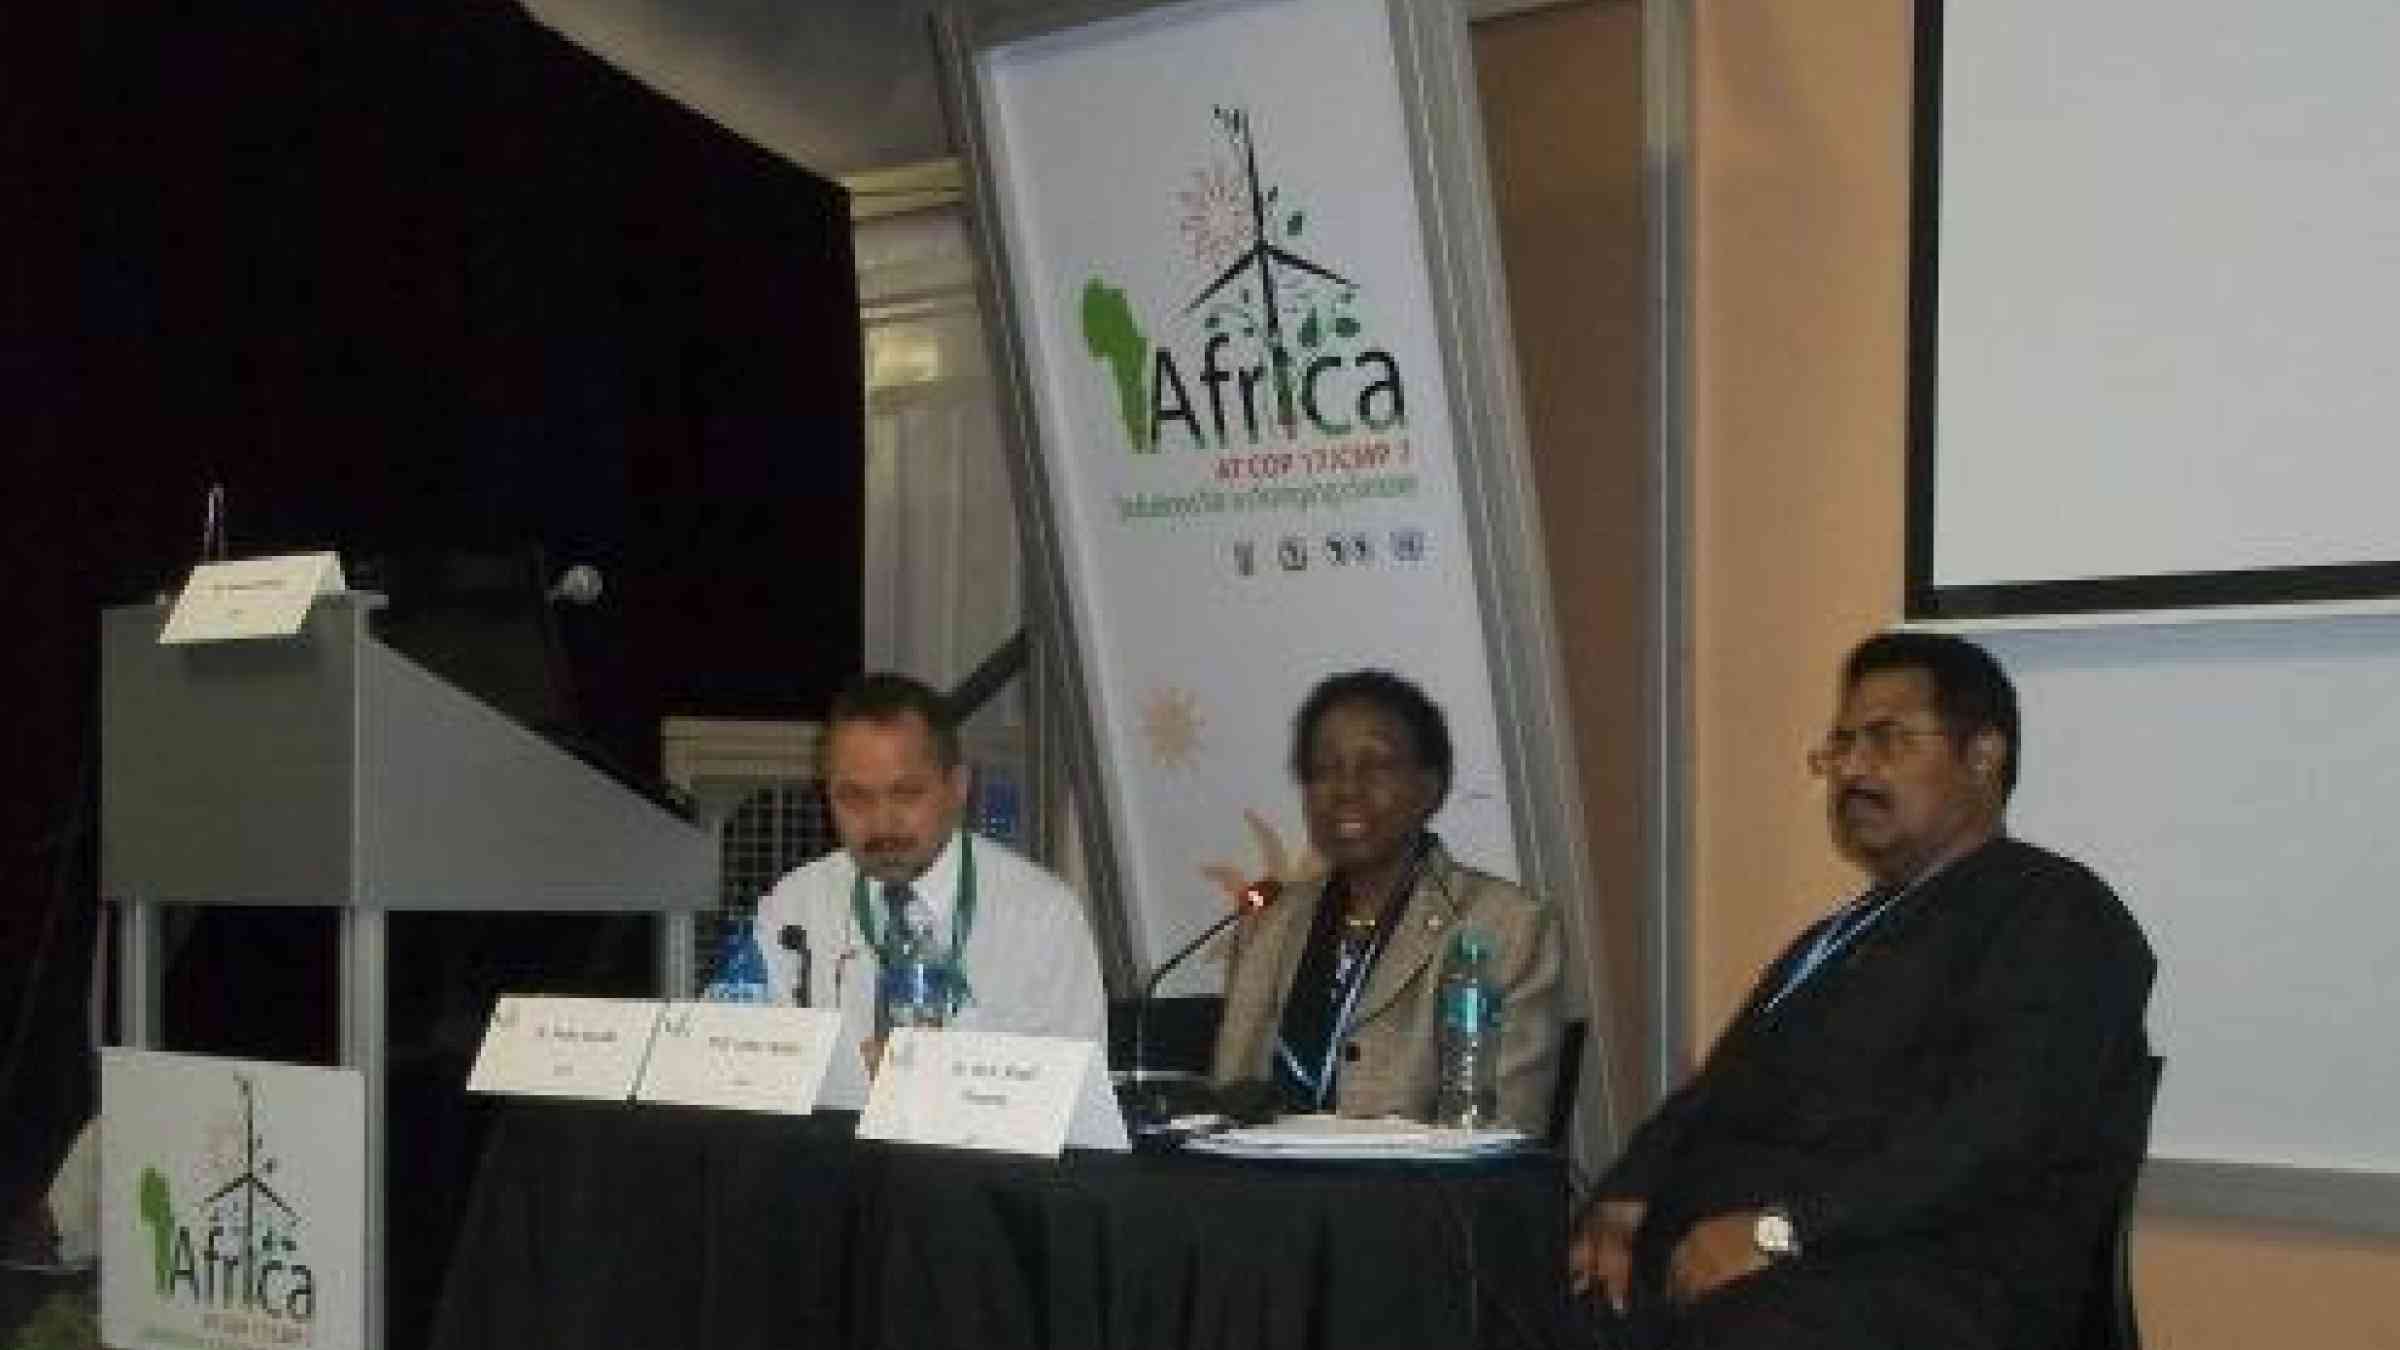 Pedro Basabe, Head, UNISDR Africa, H.E. Tumusiime Rhoda Peace, Commissioner for Rural Economy & Agriculture, AUC and Khalil Timamy, Head of Environment, Water & Natural Resources, AUC  at the COP-17.